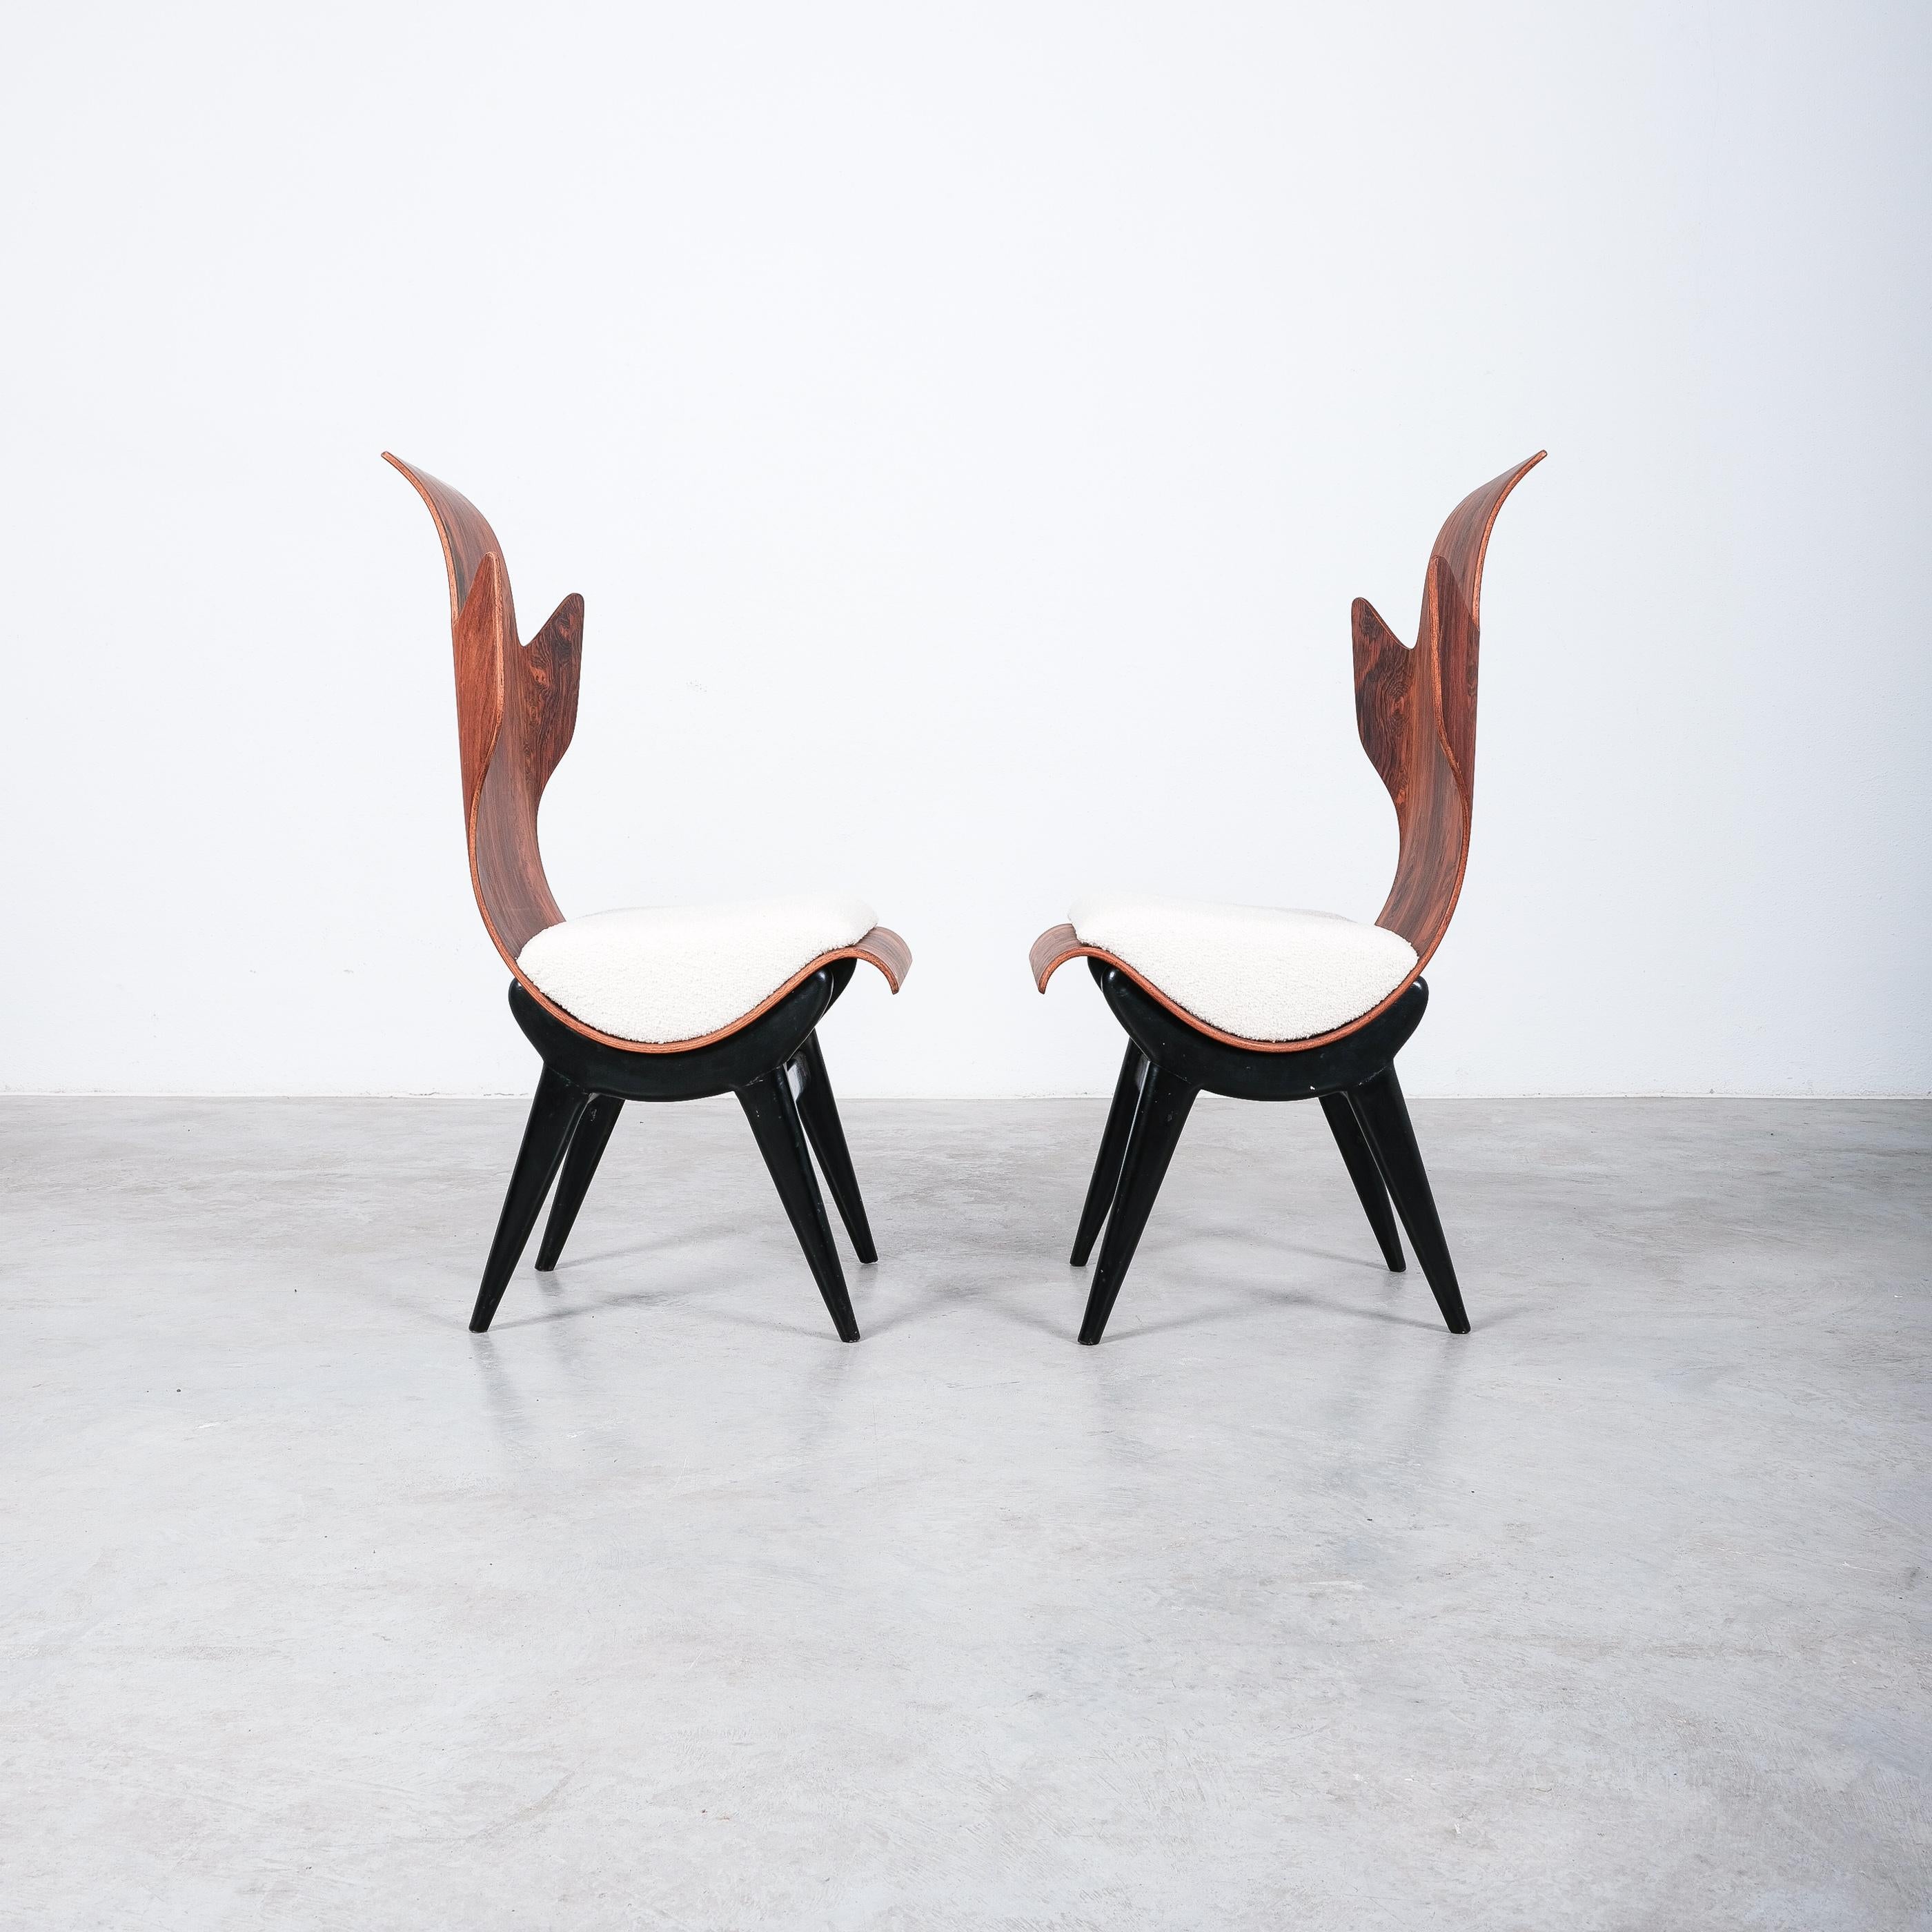 Pair of midcentury Italian Flame chairs newly upholstered, 1960s.

A pair of very rare and sculptural Pozzi & Verga model ‘2/R’ or ''Flame'' chairs, designed by Dante LaTorre. The chairs are made of bent, laminated rosewood on a black ash frame.